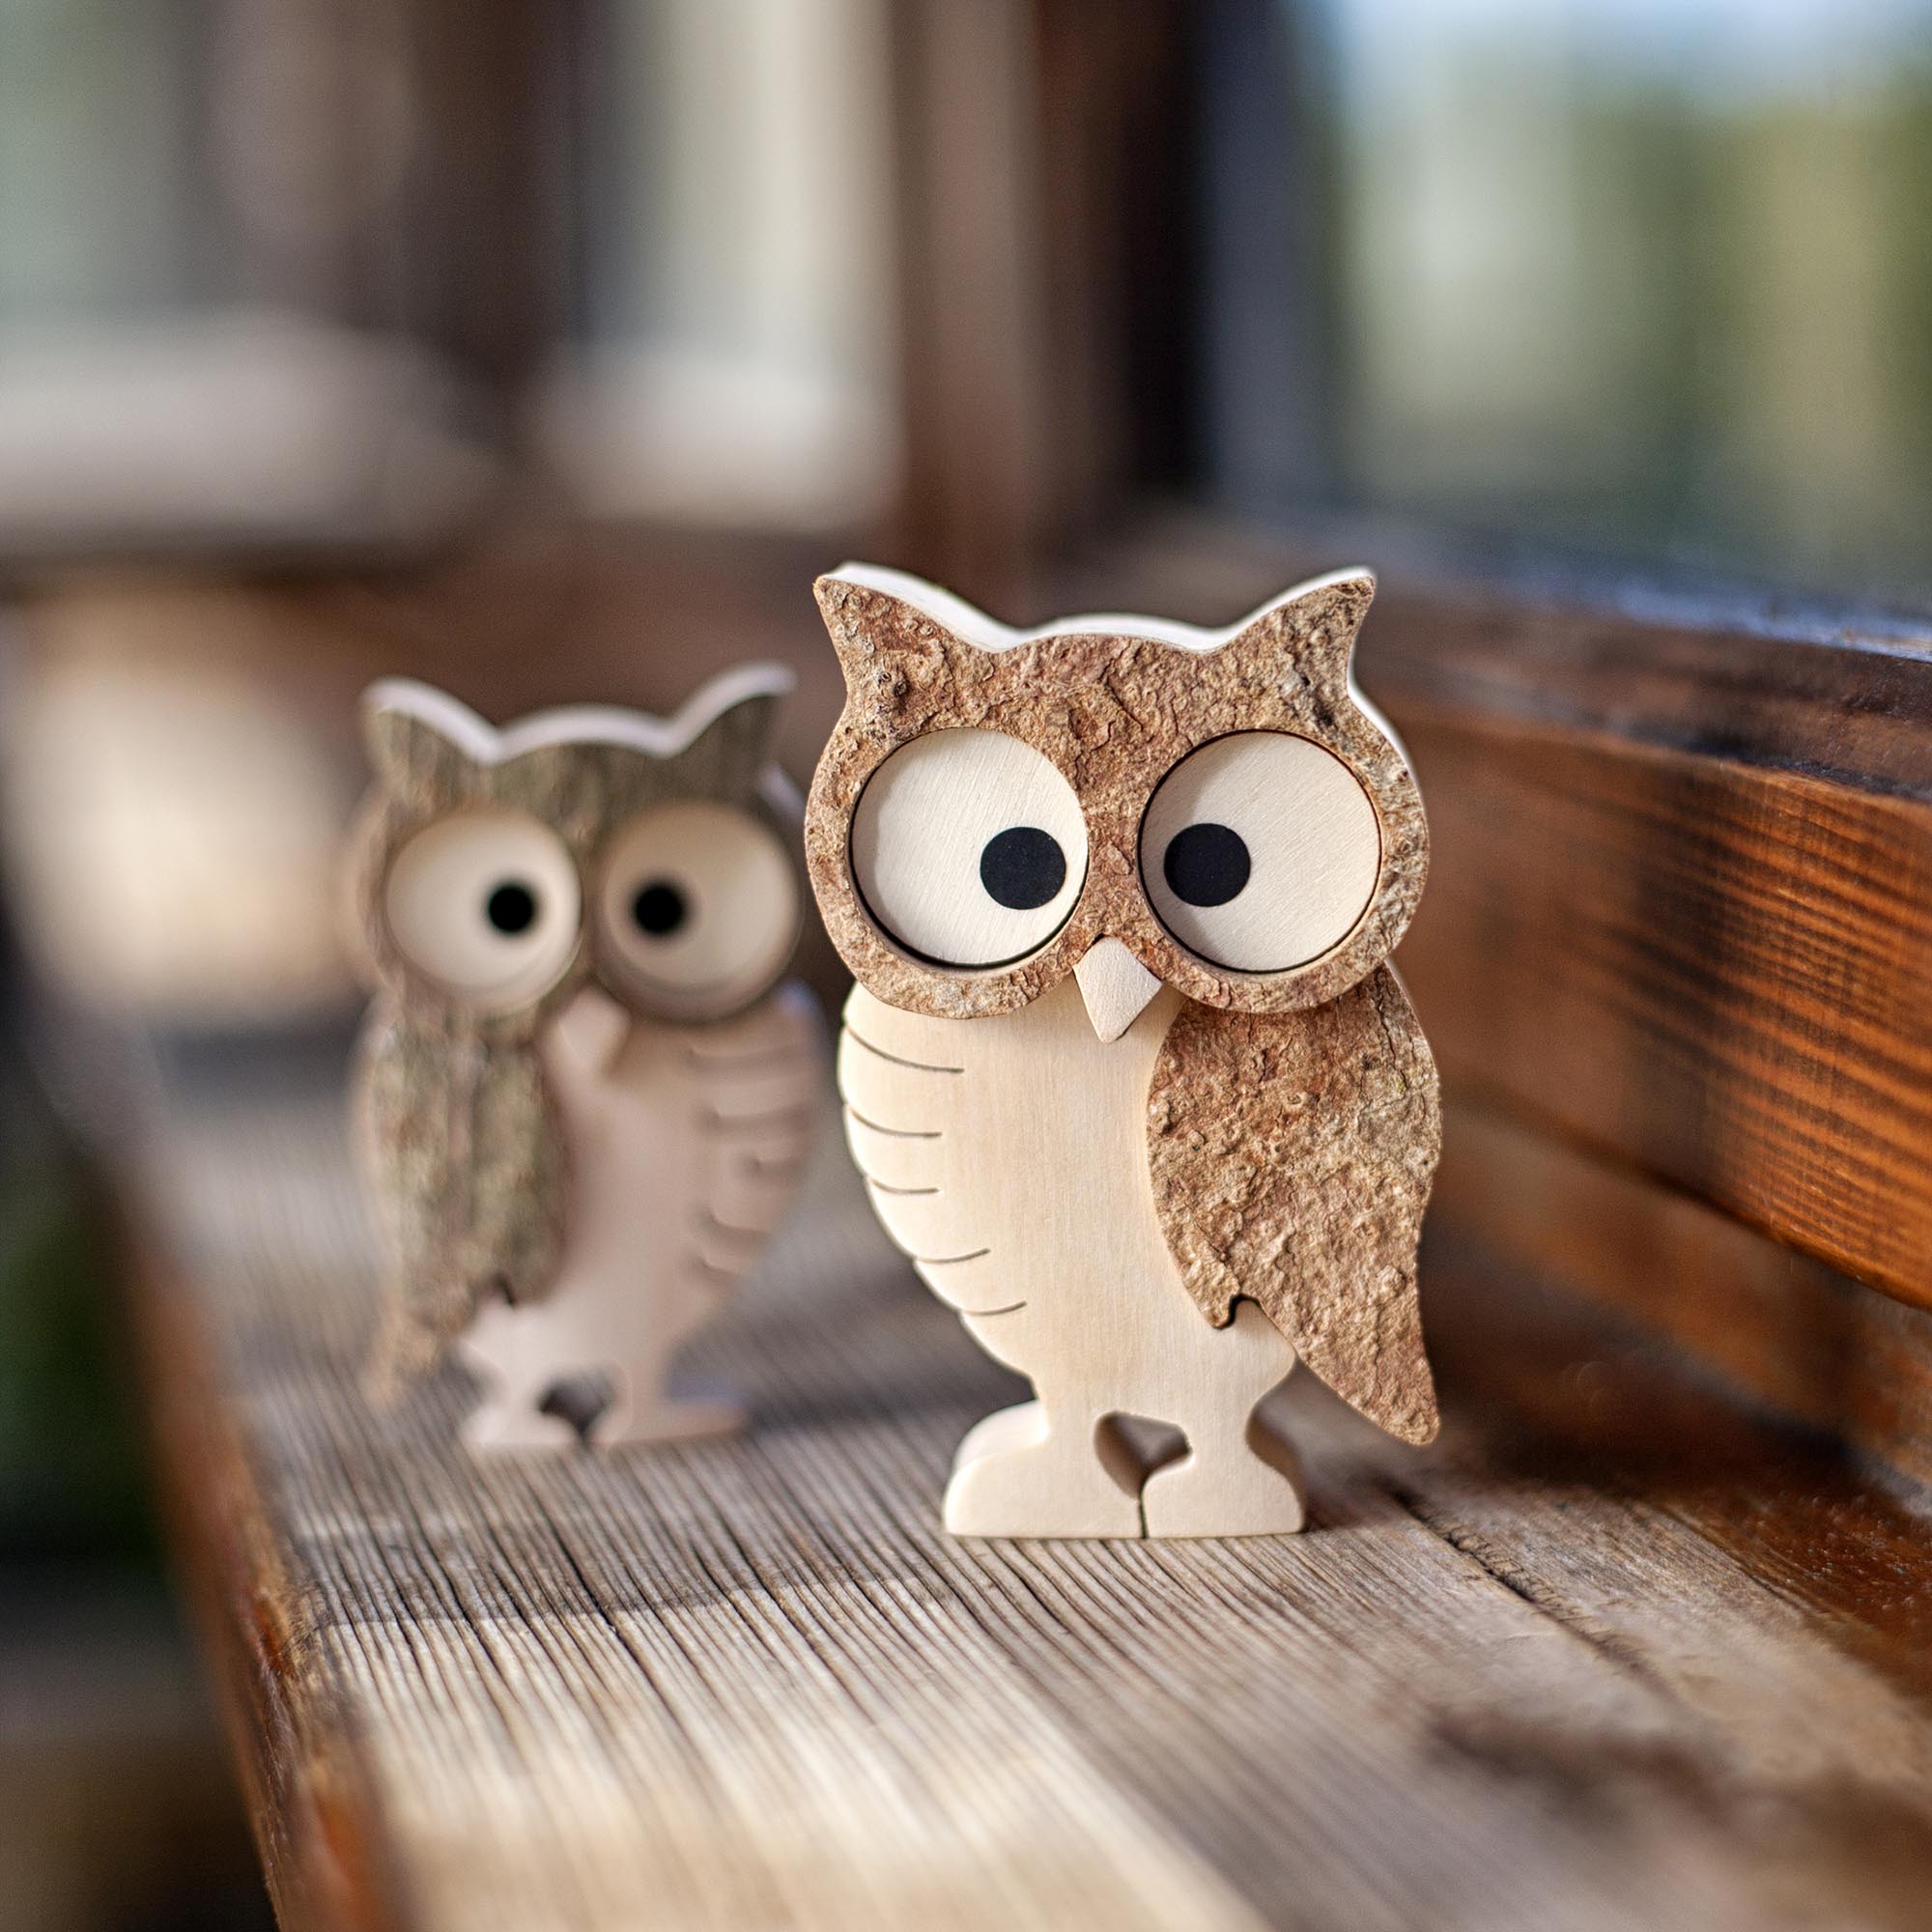 Two-Piece Wooden Bark Owl Figurines